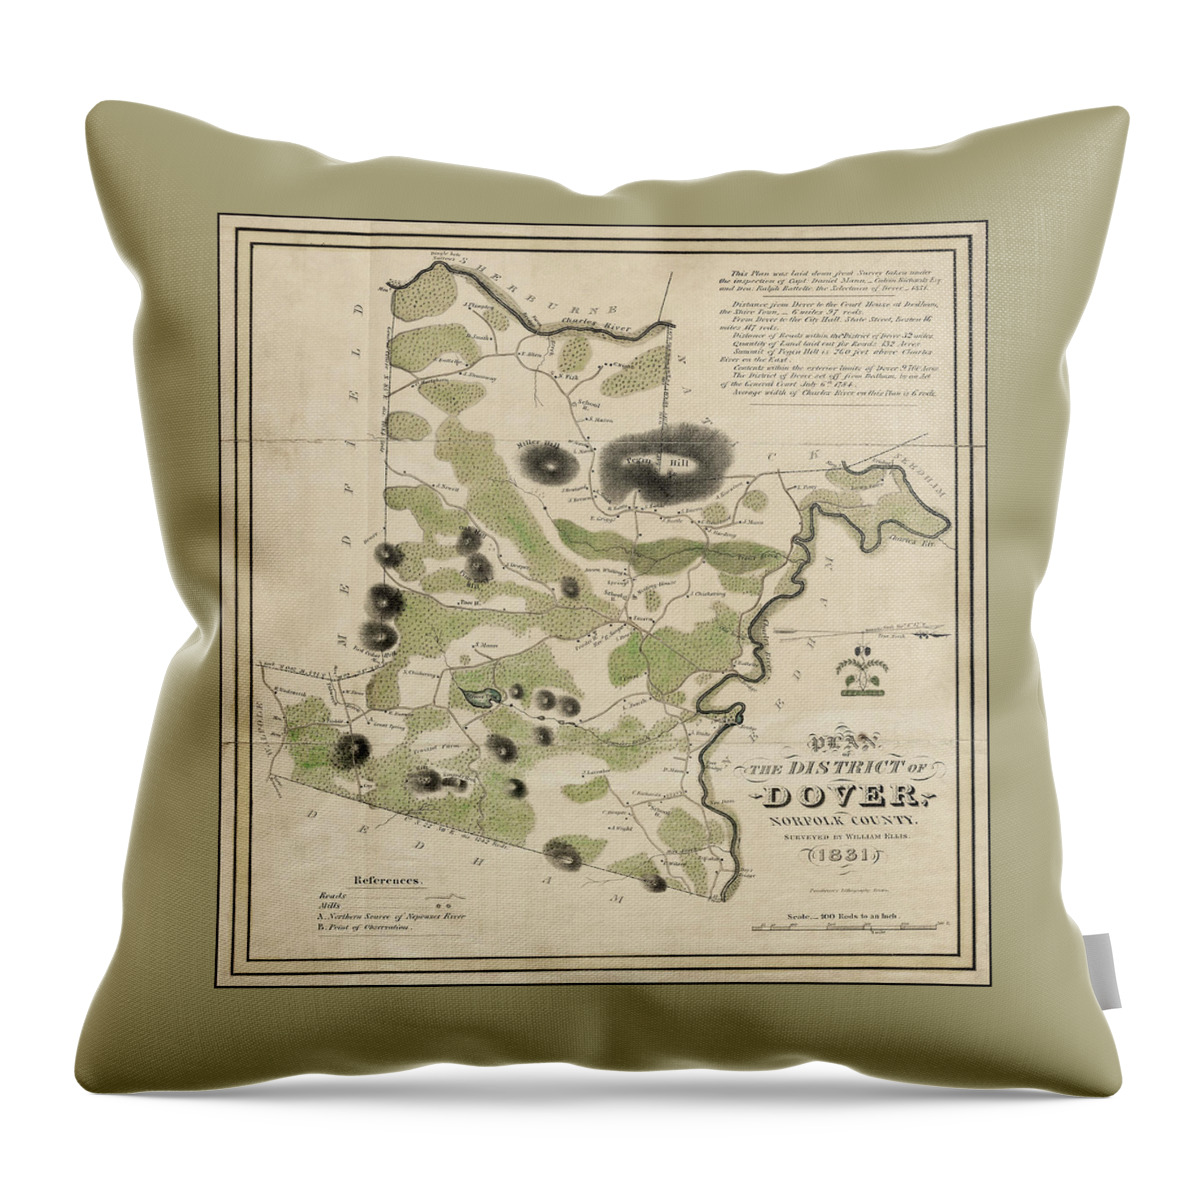 Dover Throw Pillow featuring the photograph Dover Massachusetts Historical Map 1831 by Carol Japp